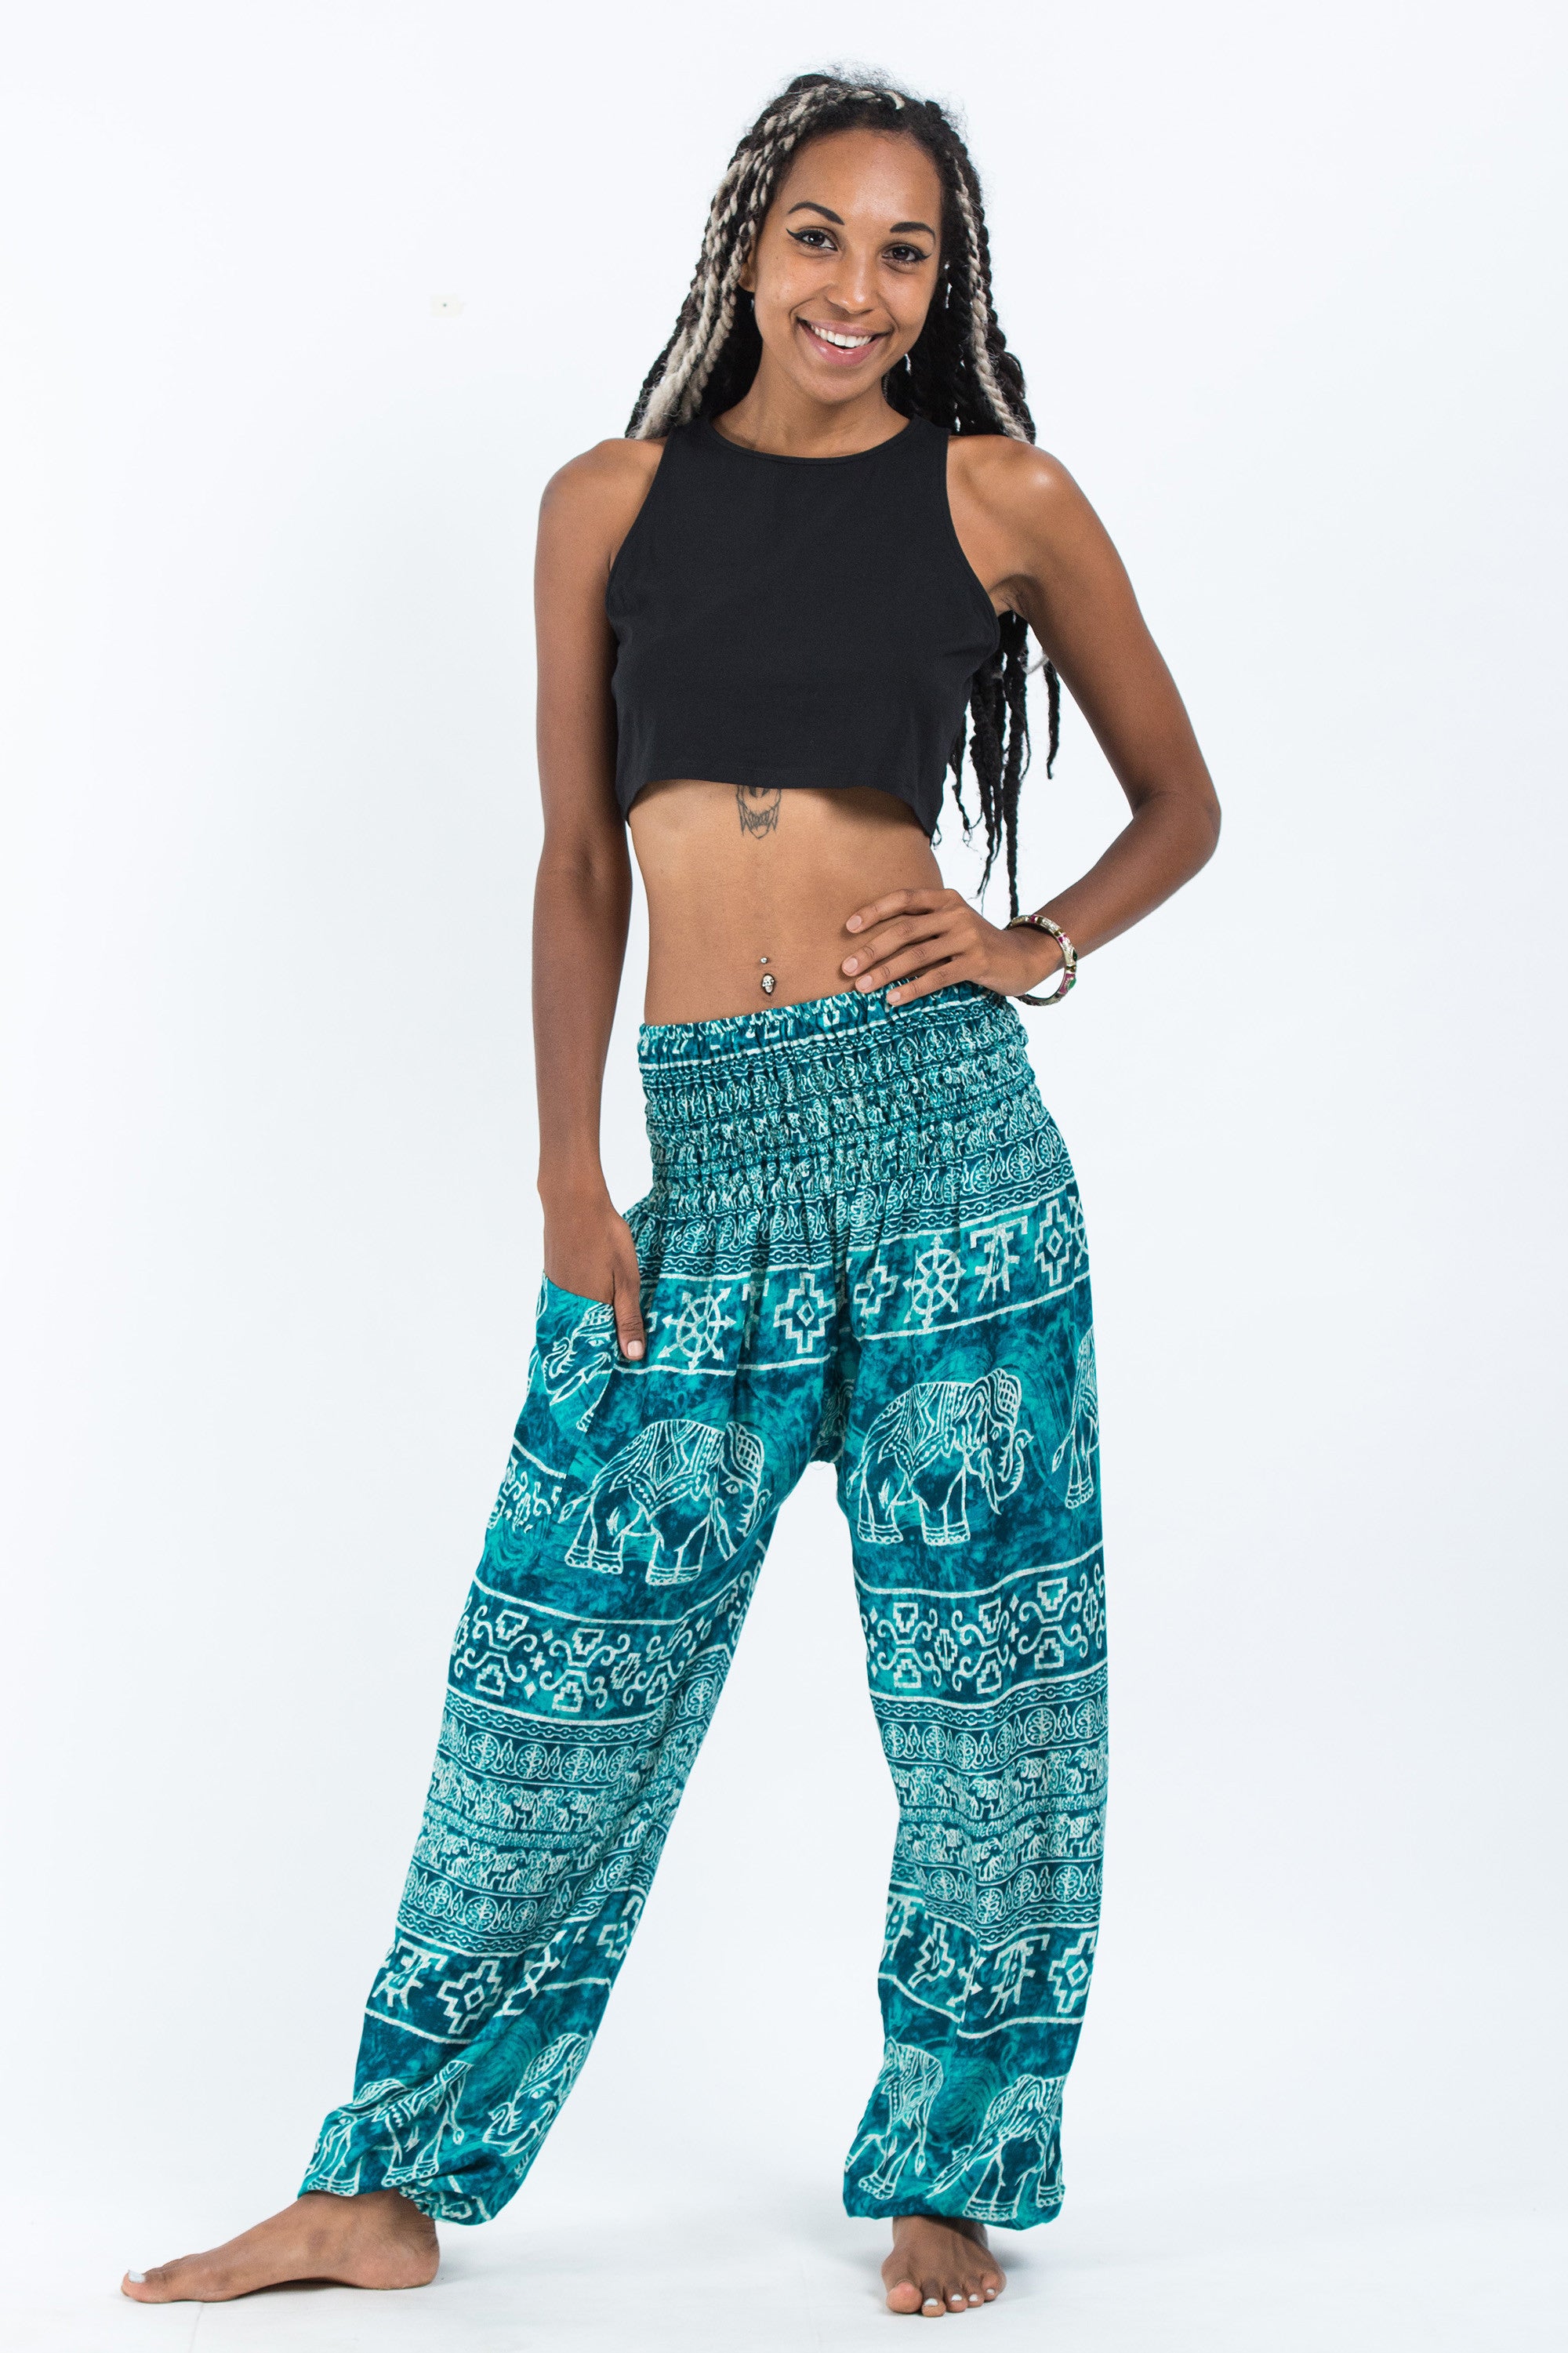 Red High Waisted Elephants Pants – Threads for Education